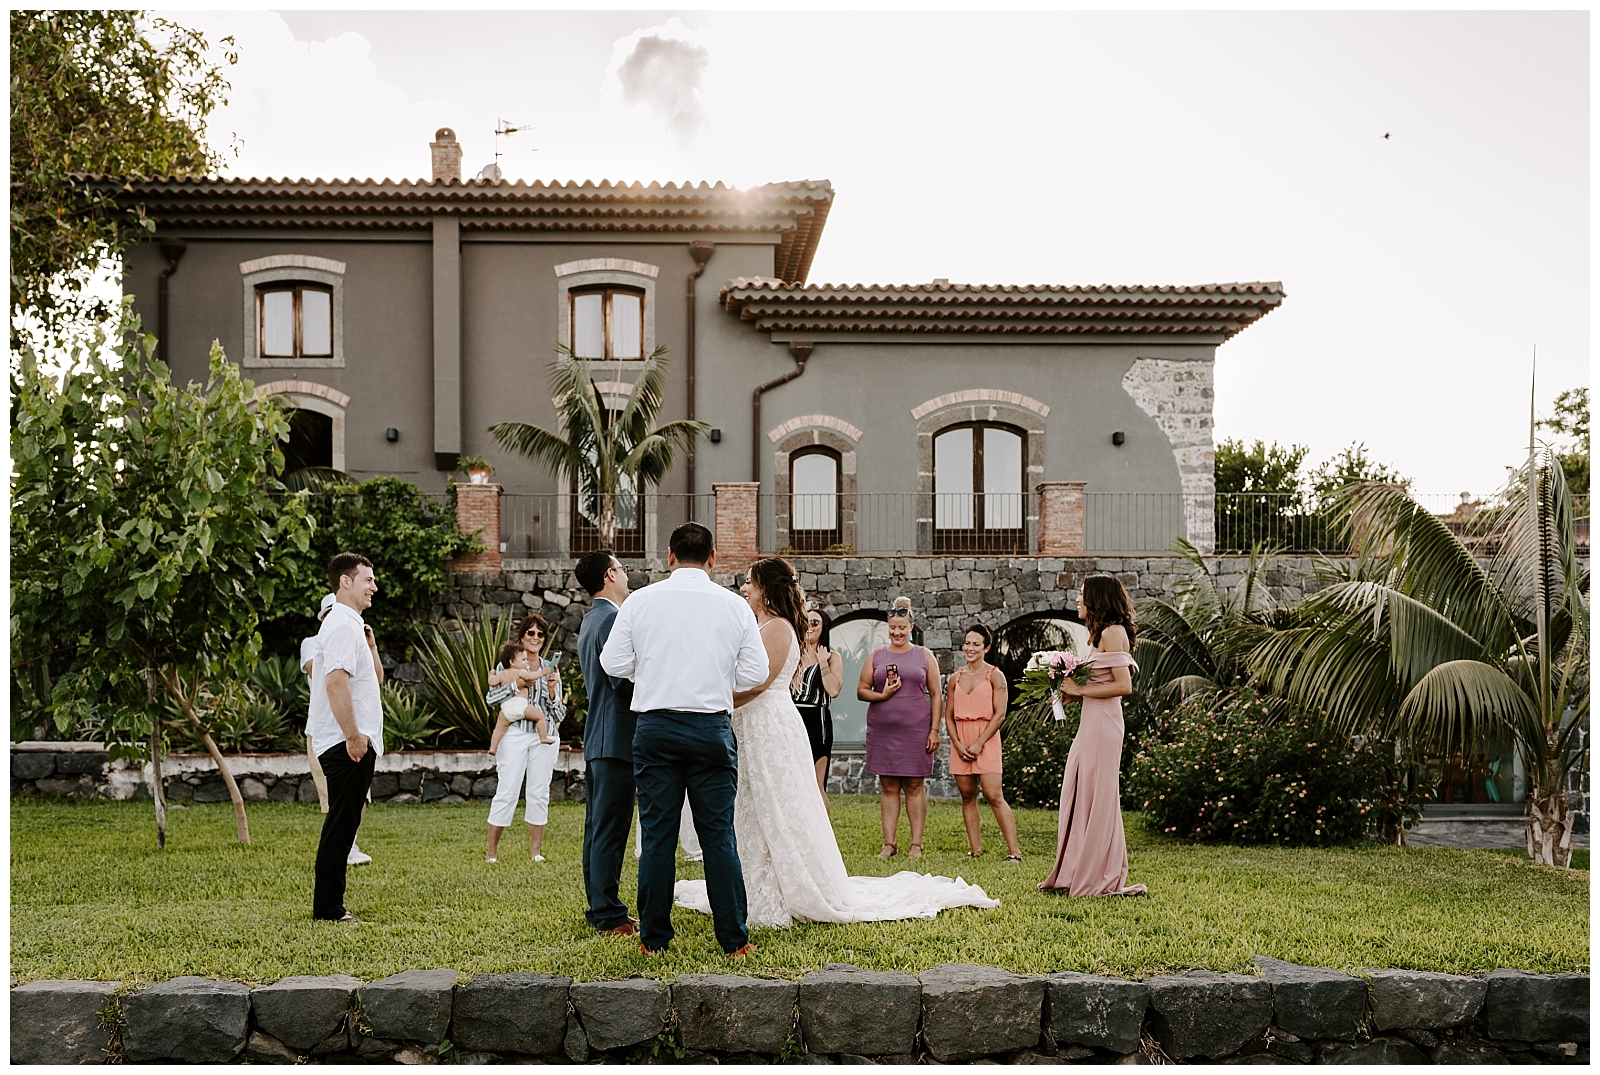 Intimate wedding in Italy